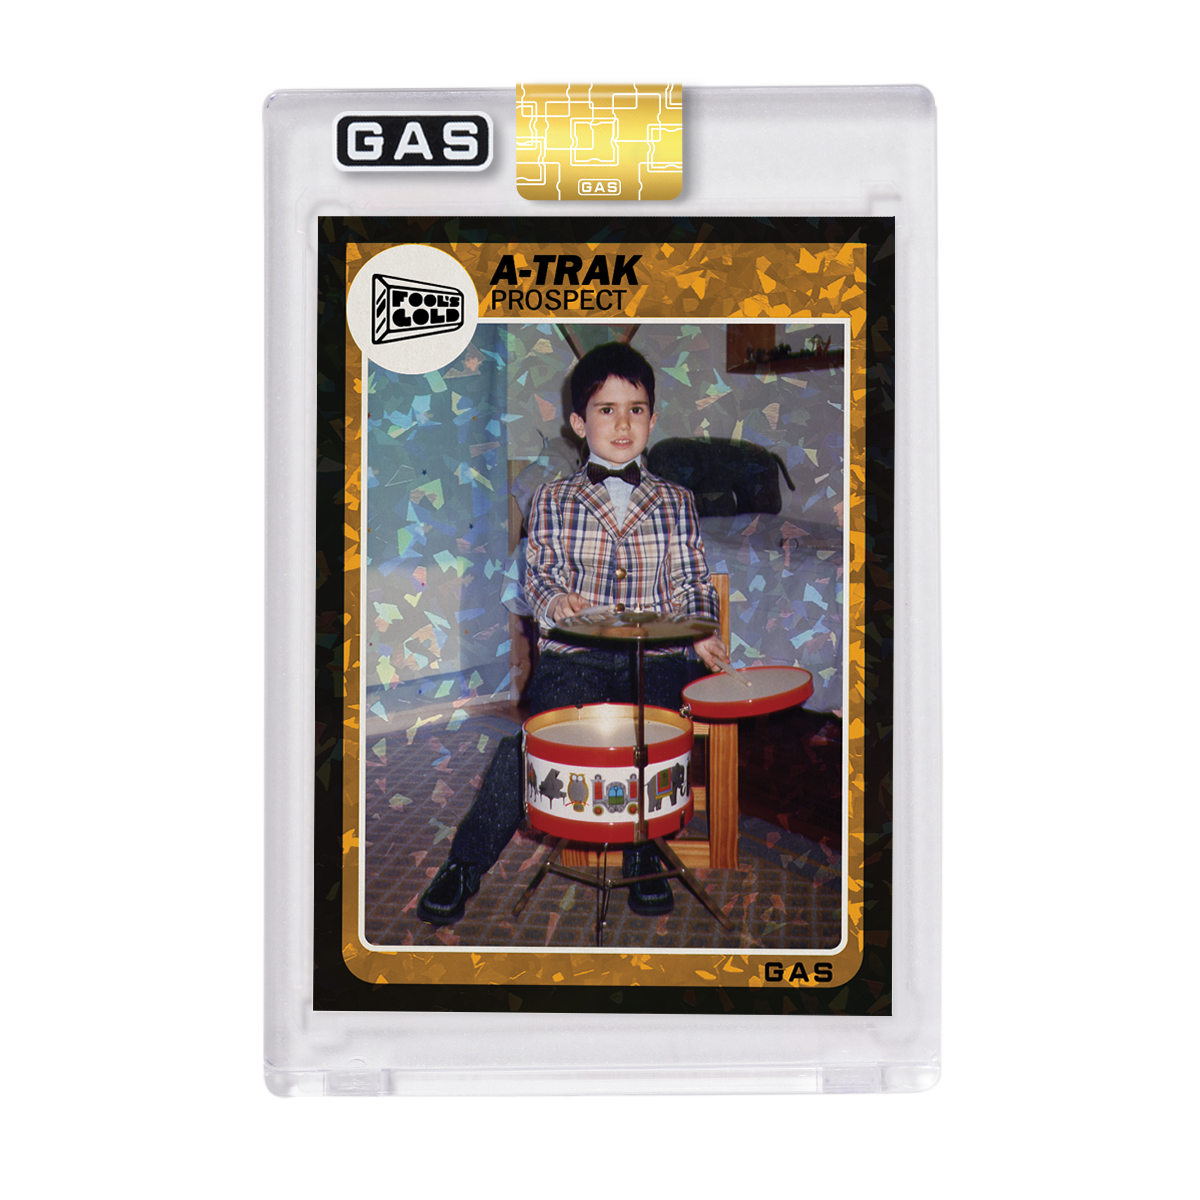 Limited Edition A-Trak & Fool’s Gold Records GAS Trading Cards Set